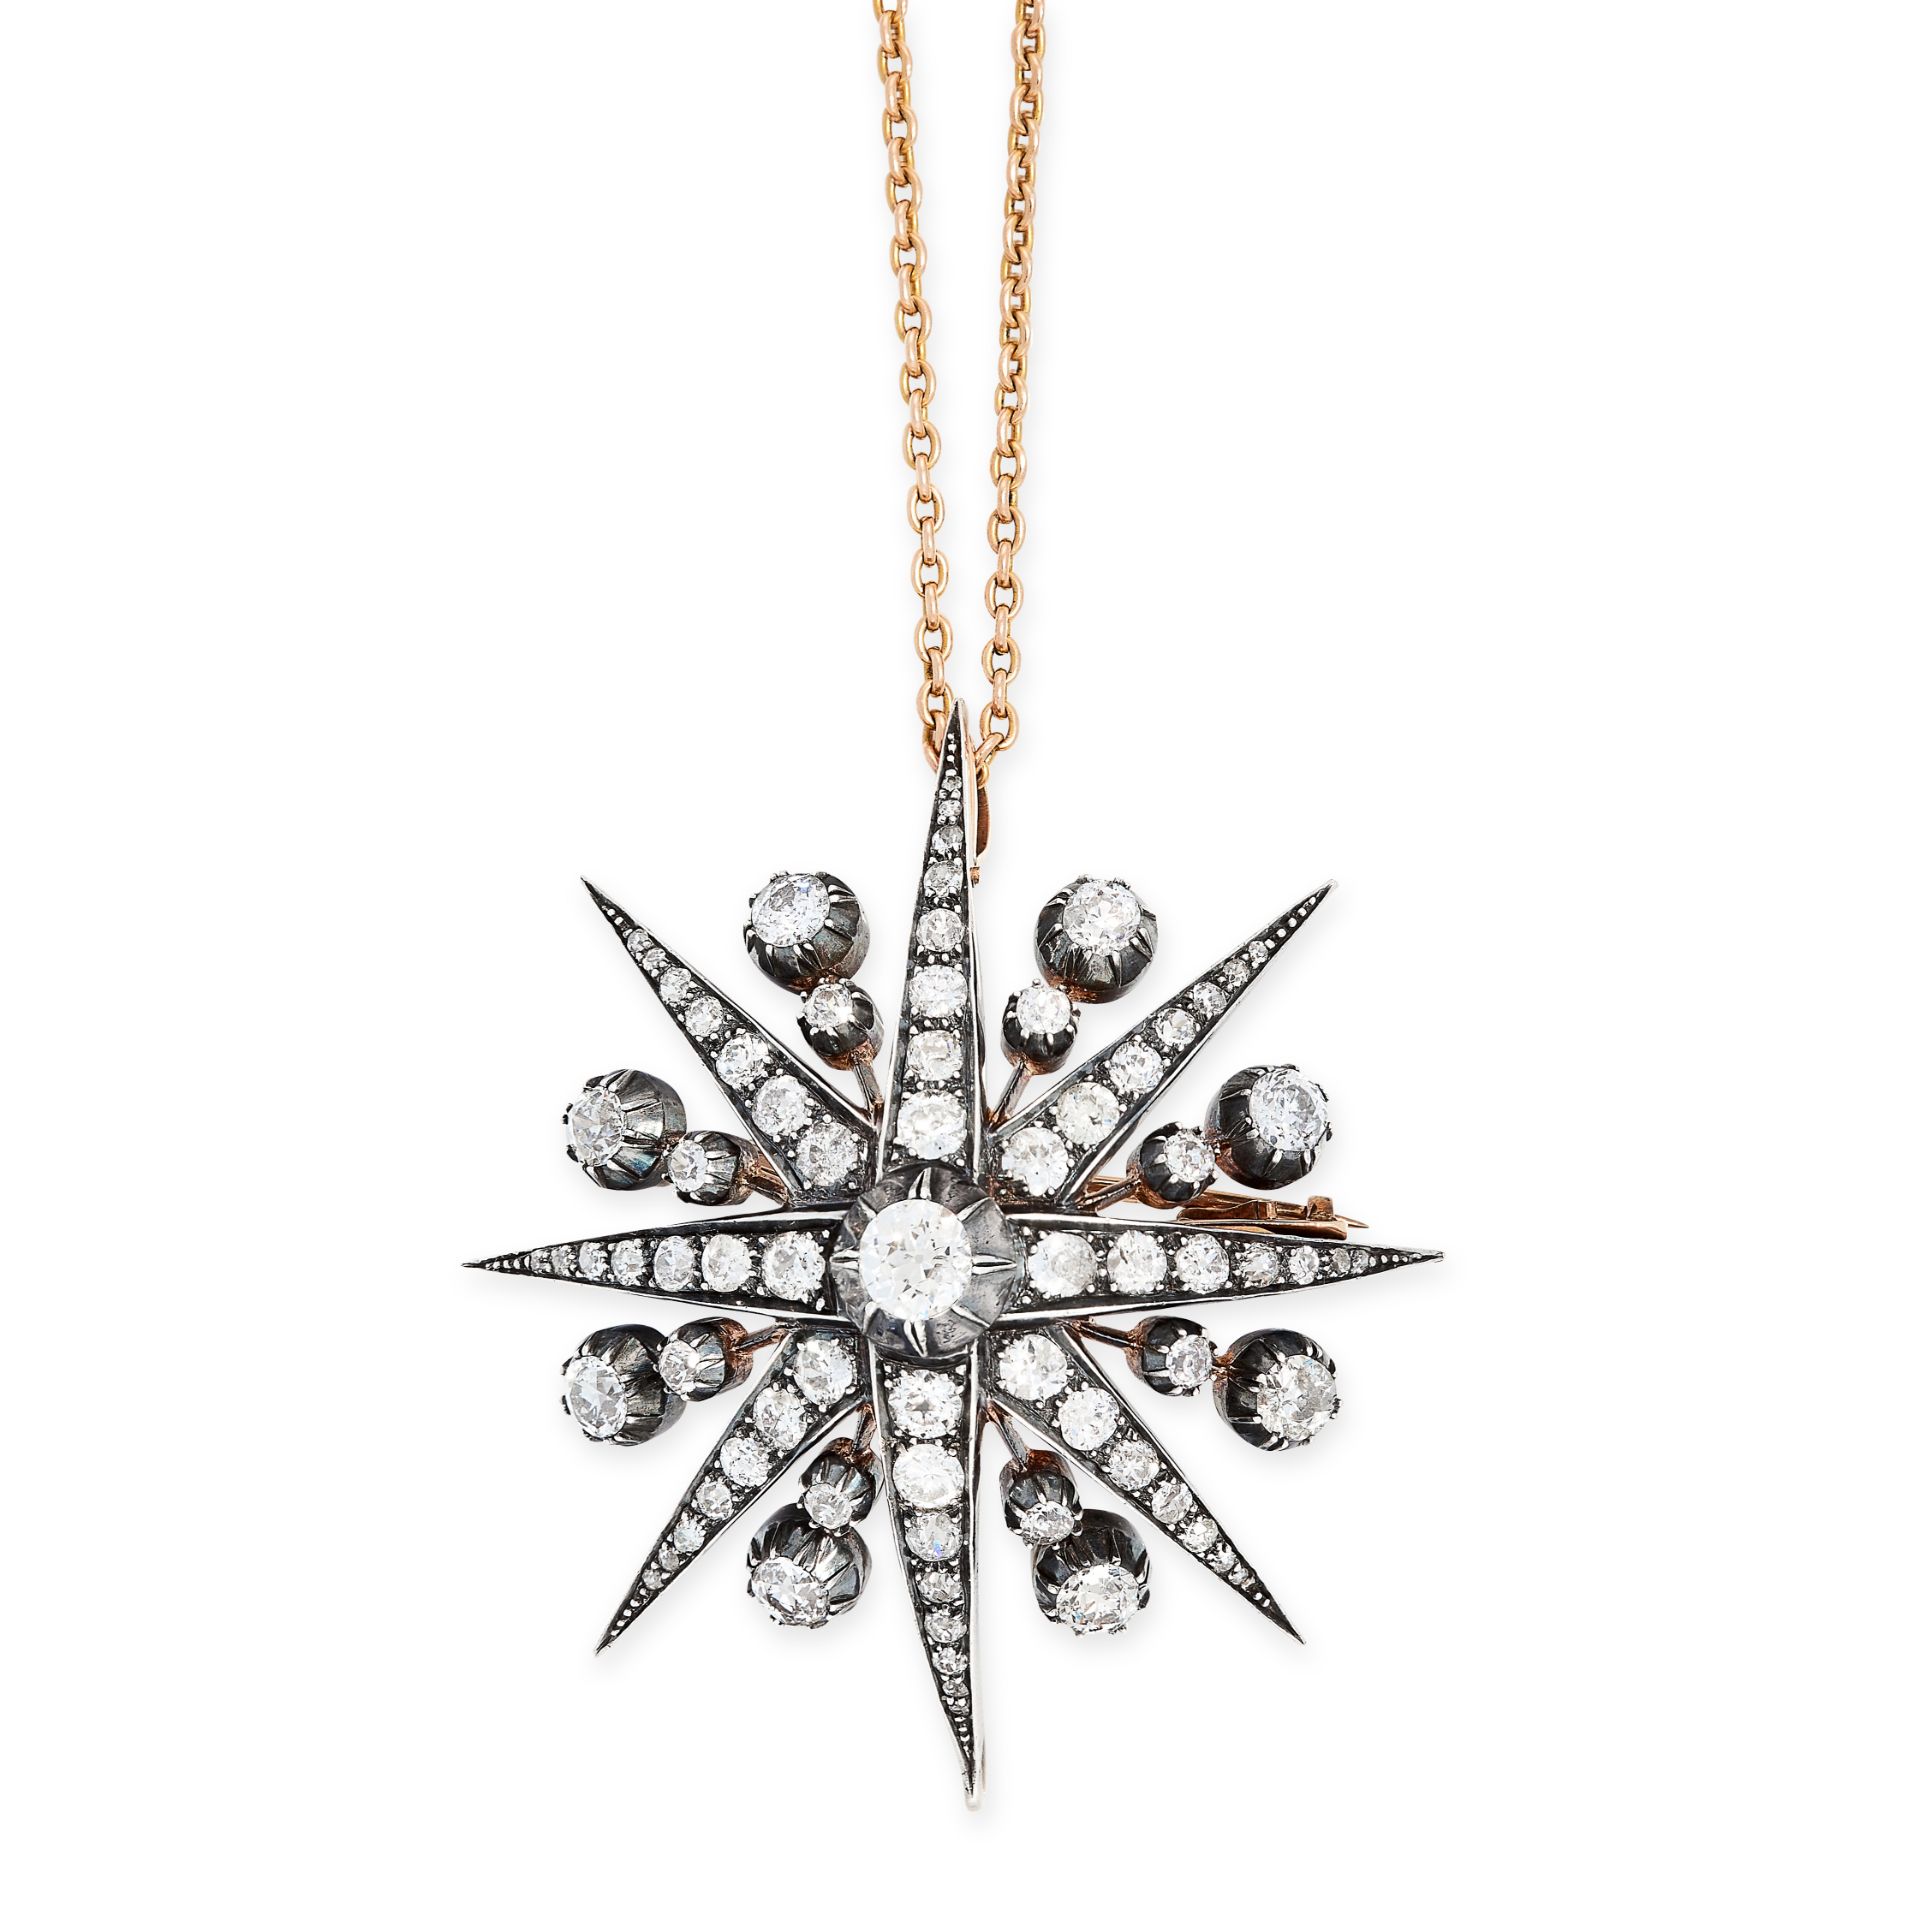 A FINE ANTIQUE DIAMOND STAR BROOCH / PENDANT AND CHAIN, 19TH CENTURY in yellow gold and silver,